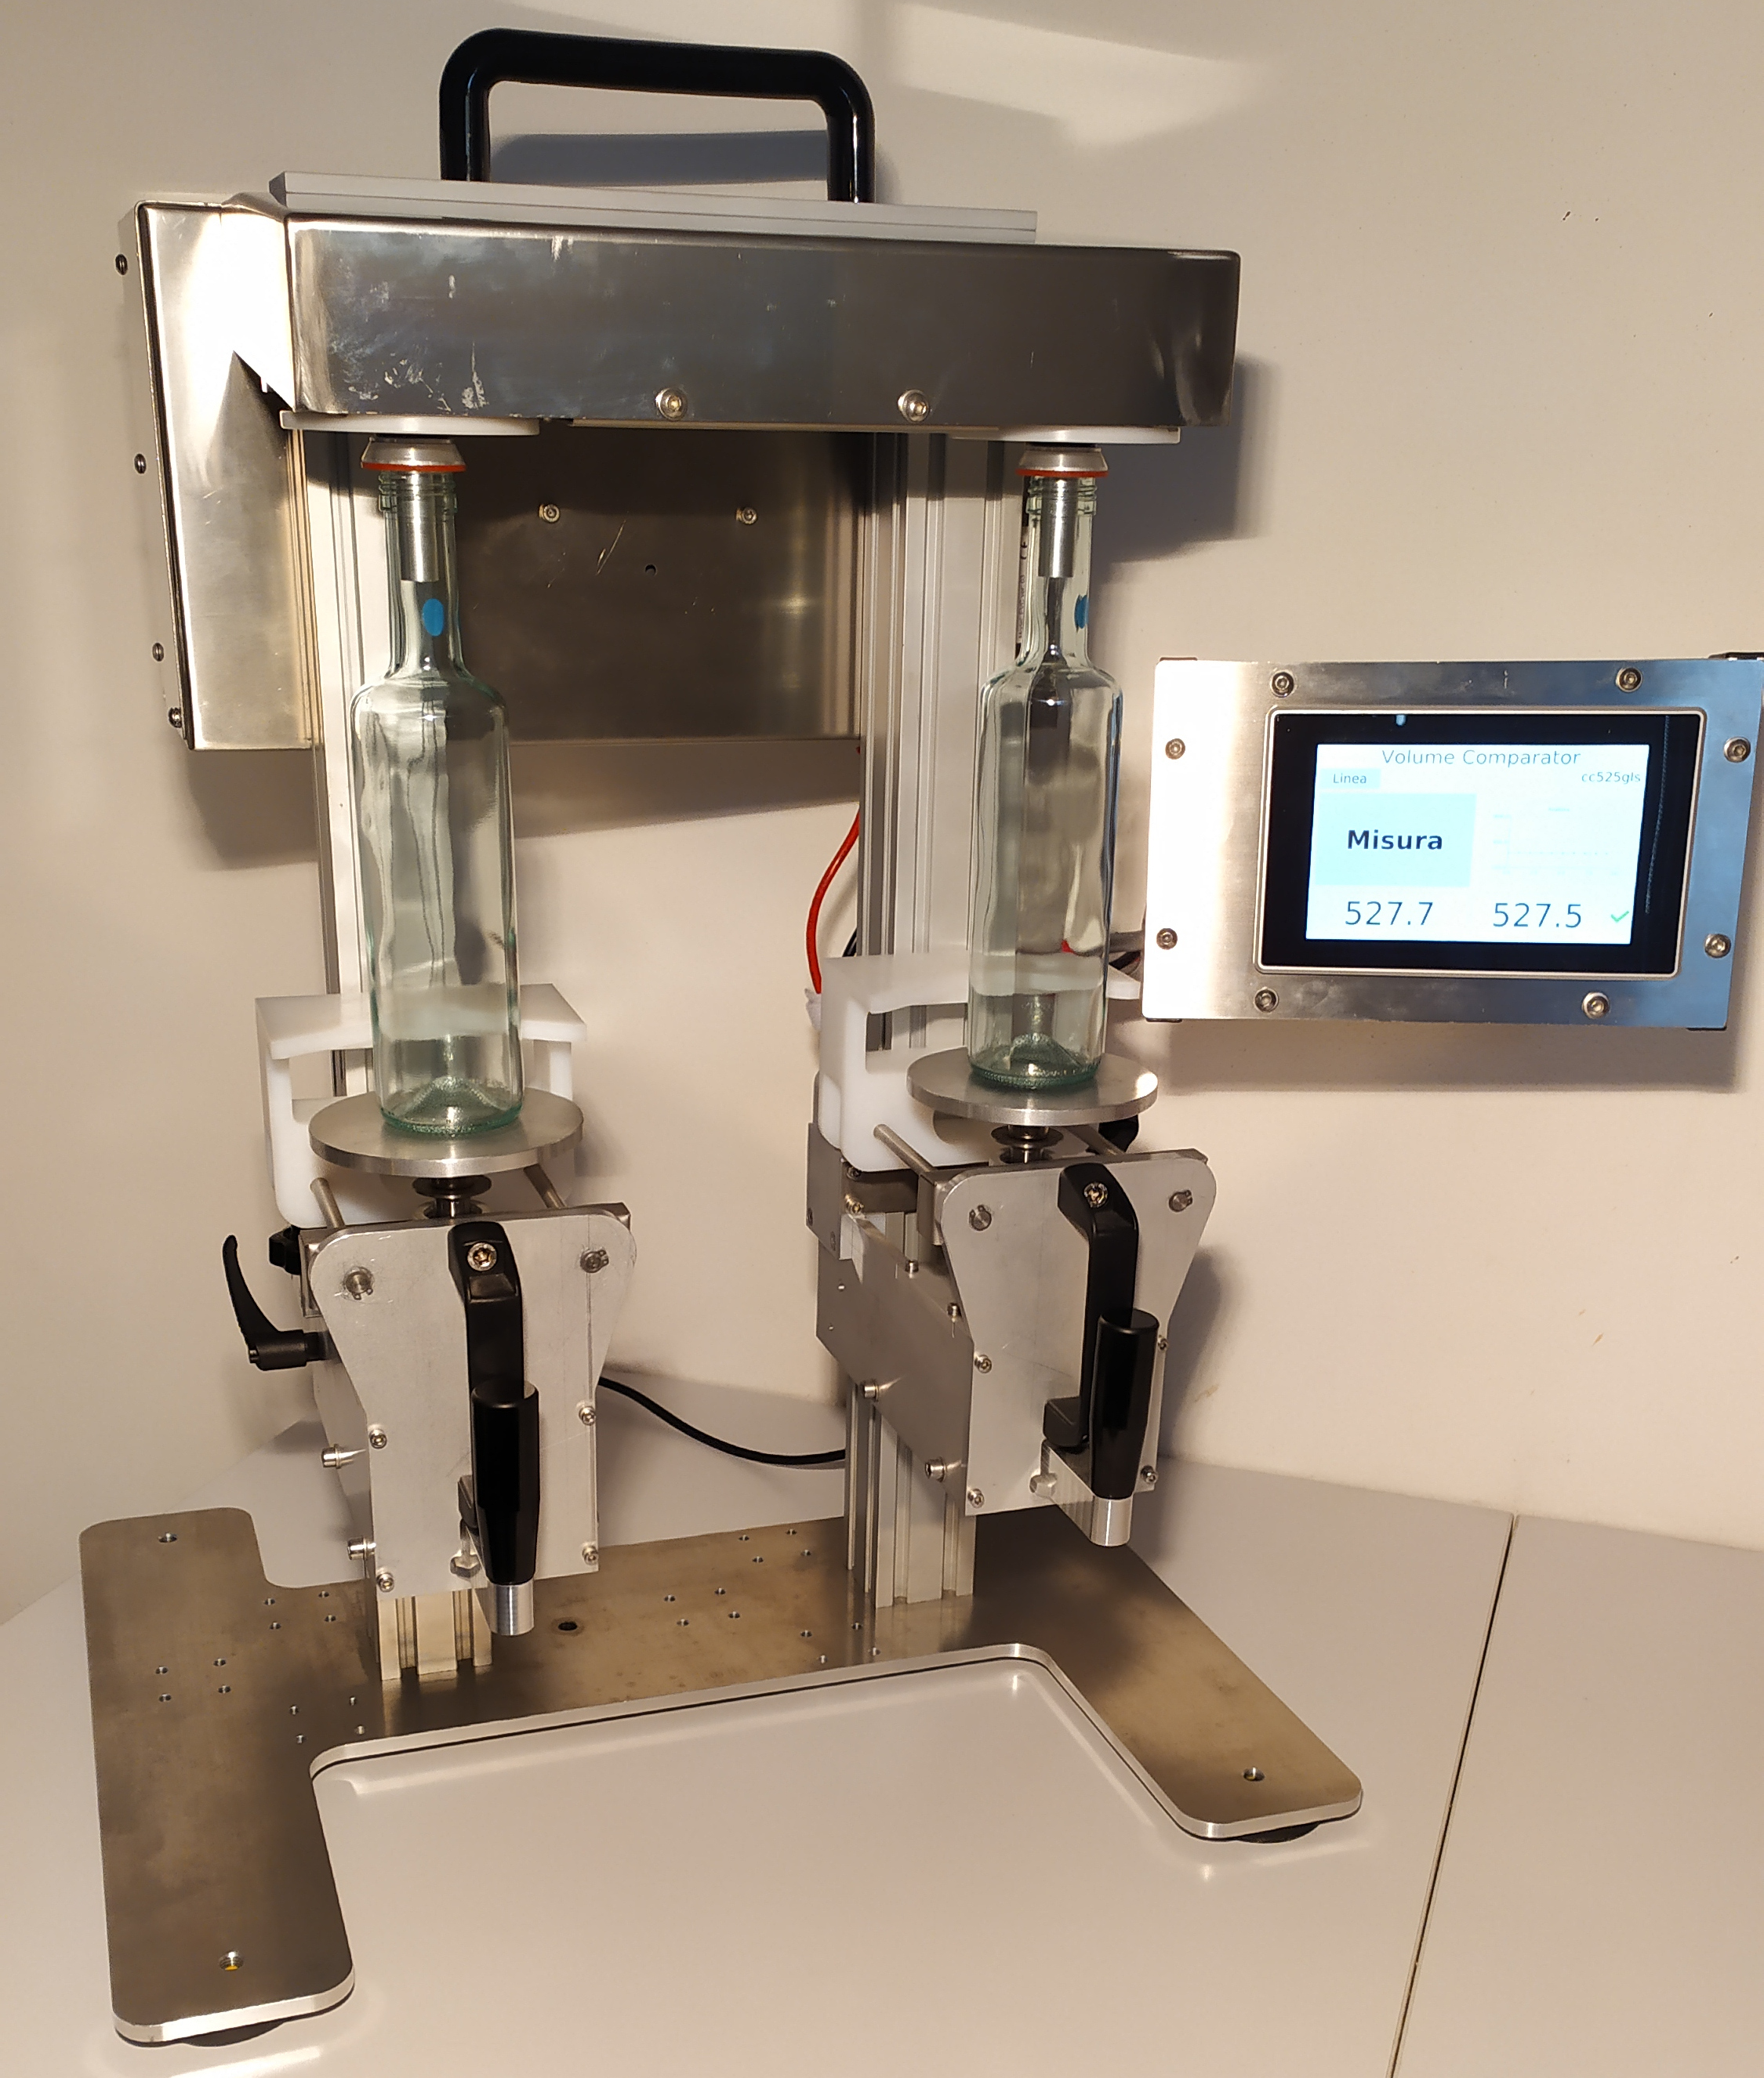 EVC is a machine for measuring the volumes of
							glass containers.